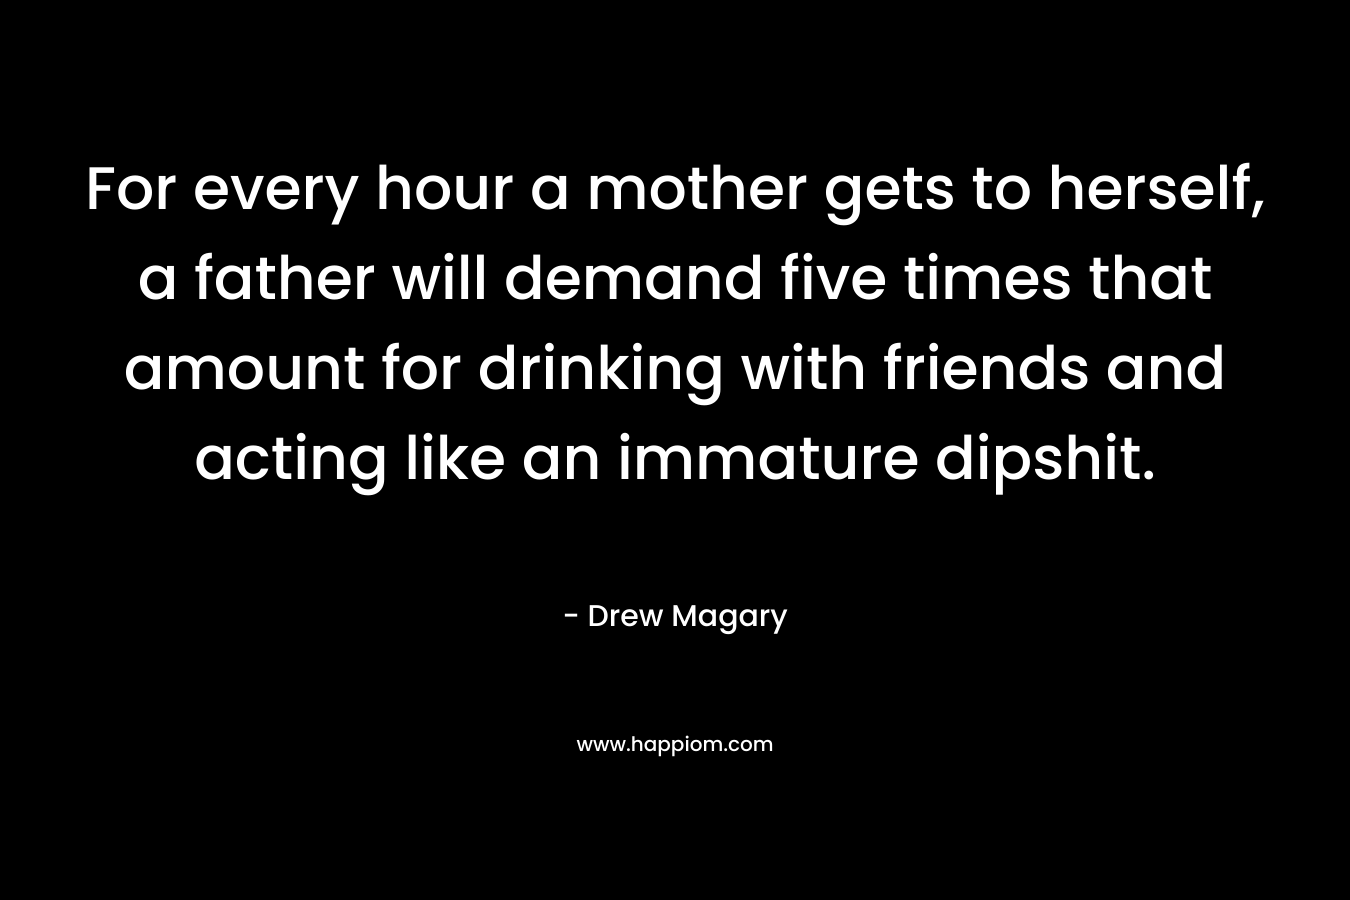 For every hour a mother gets to herself, a father will demand five times that amount for drinking with friends and acting like an immature dipshit. – Drew Magary